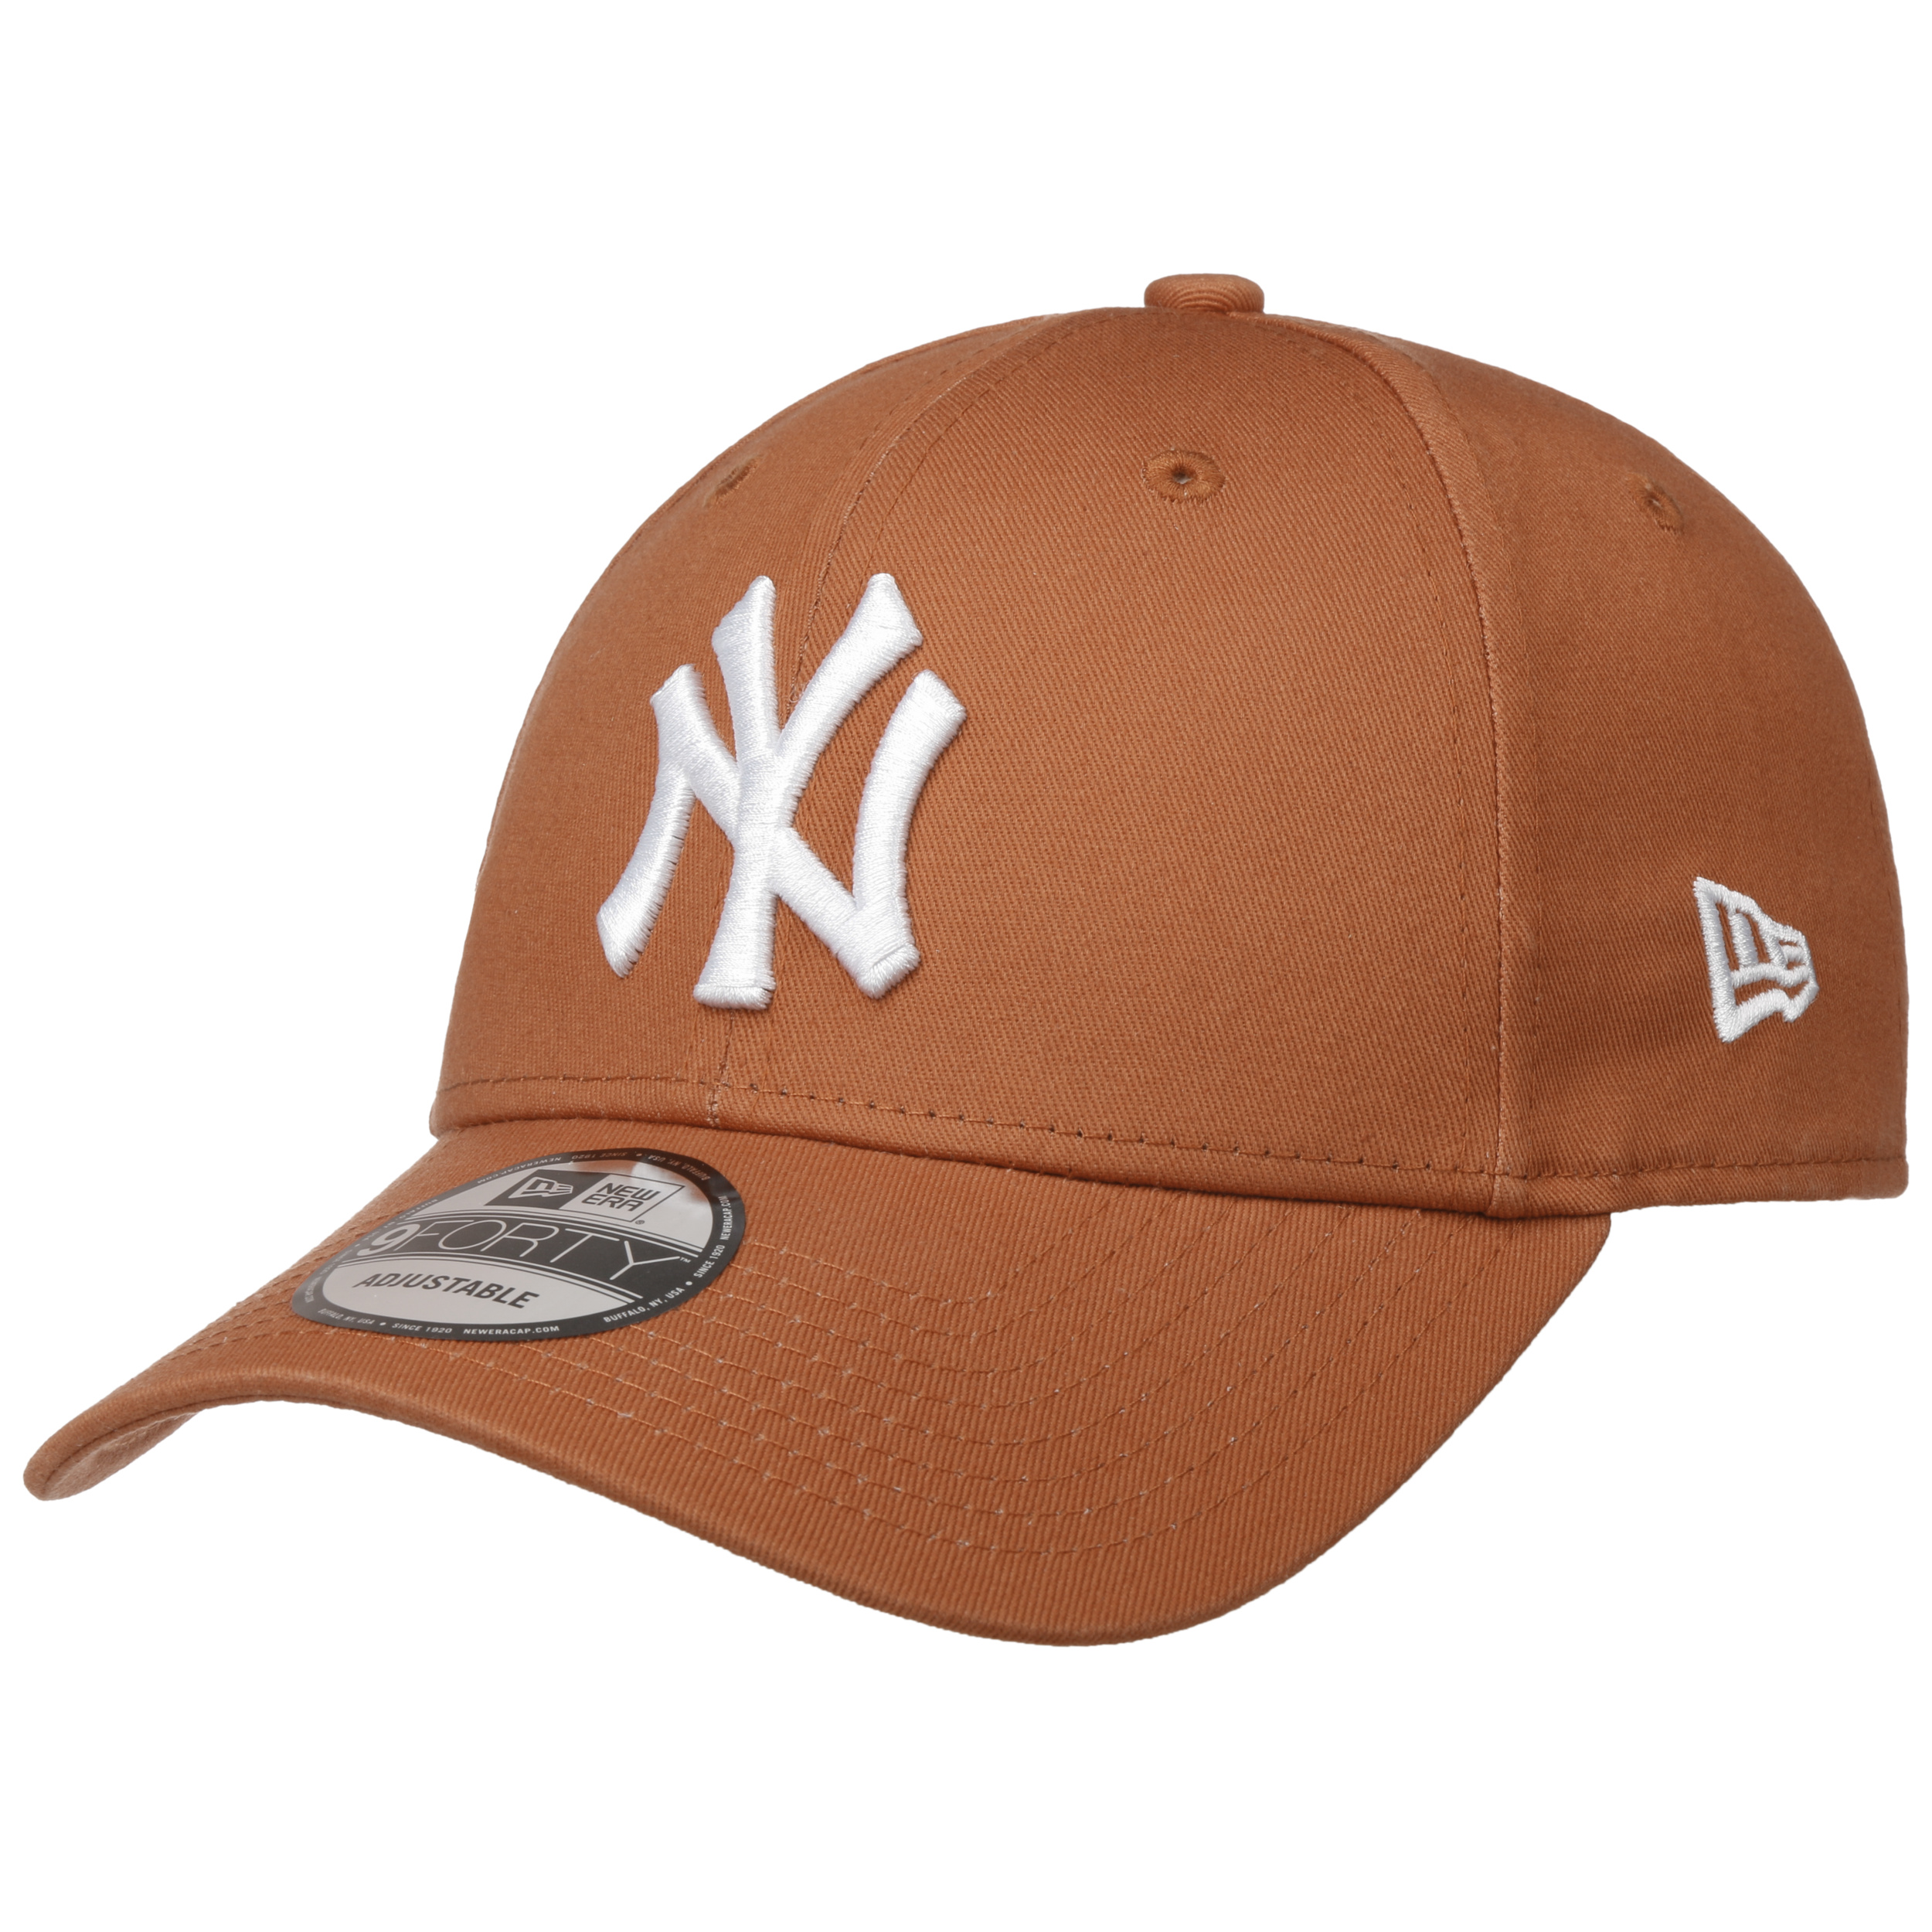 Amazoncom  MLB New York Yankees Clean Up Adjustable Hat White One Size   Sports Fan Baseball Caps  Sports  Outdoors